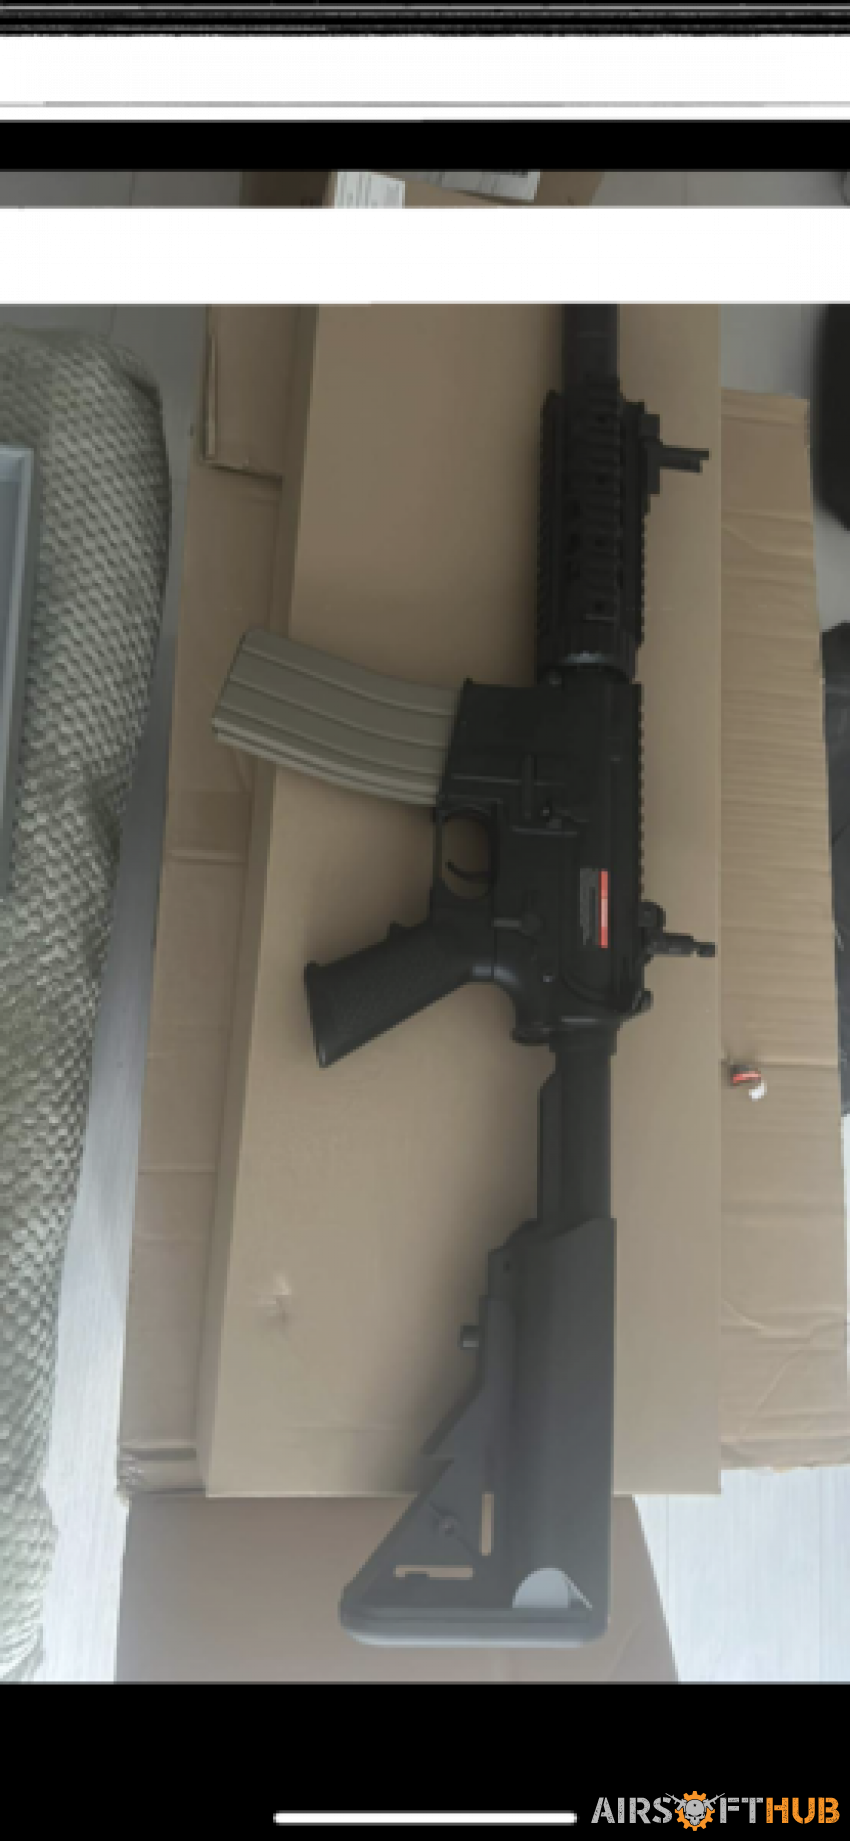 Cyma m4’s for sale - Used airsoft equipment